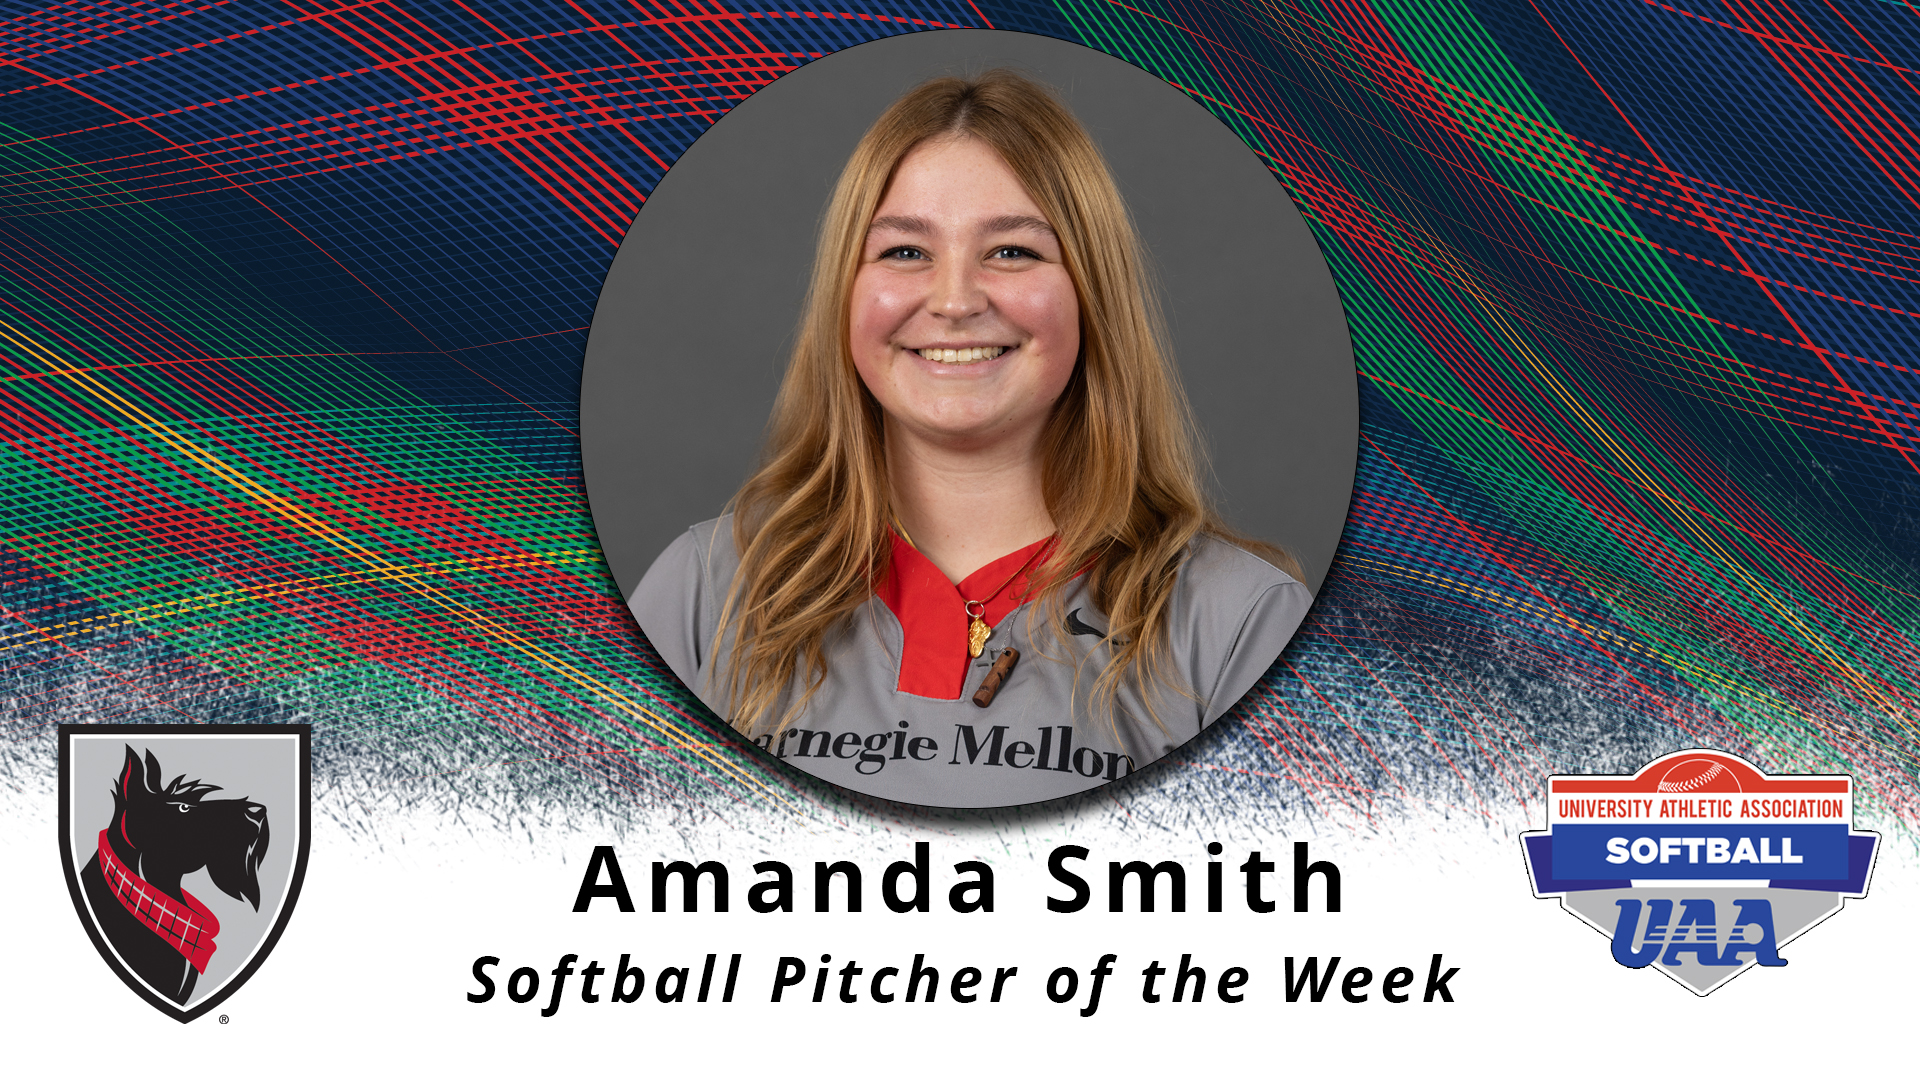 a portrait type photo of a female framed in a circle with text reading Amanda Smith Softball Pitcher of the Week